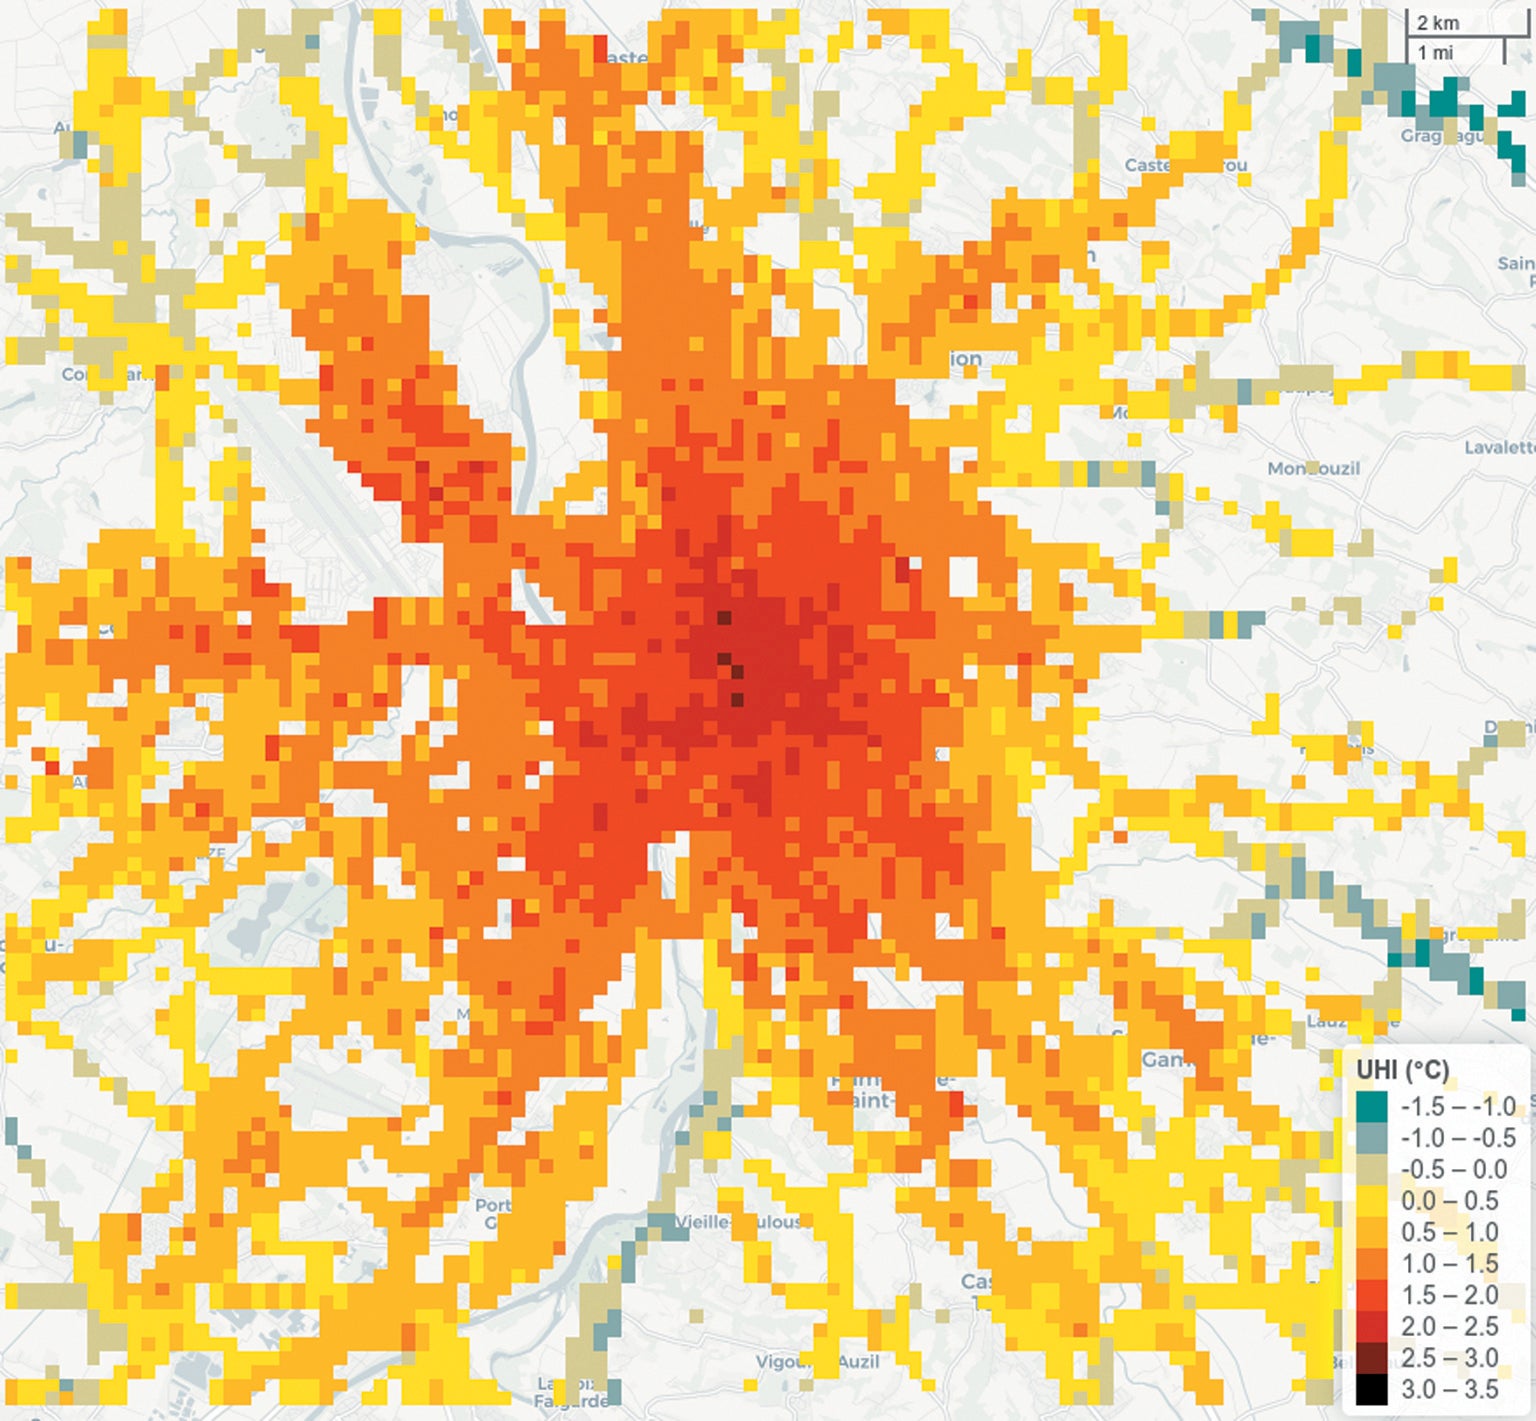 Heat map of Toulouse, France.